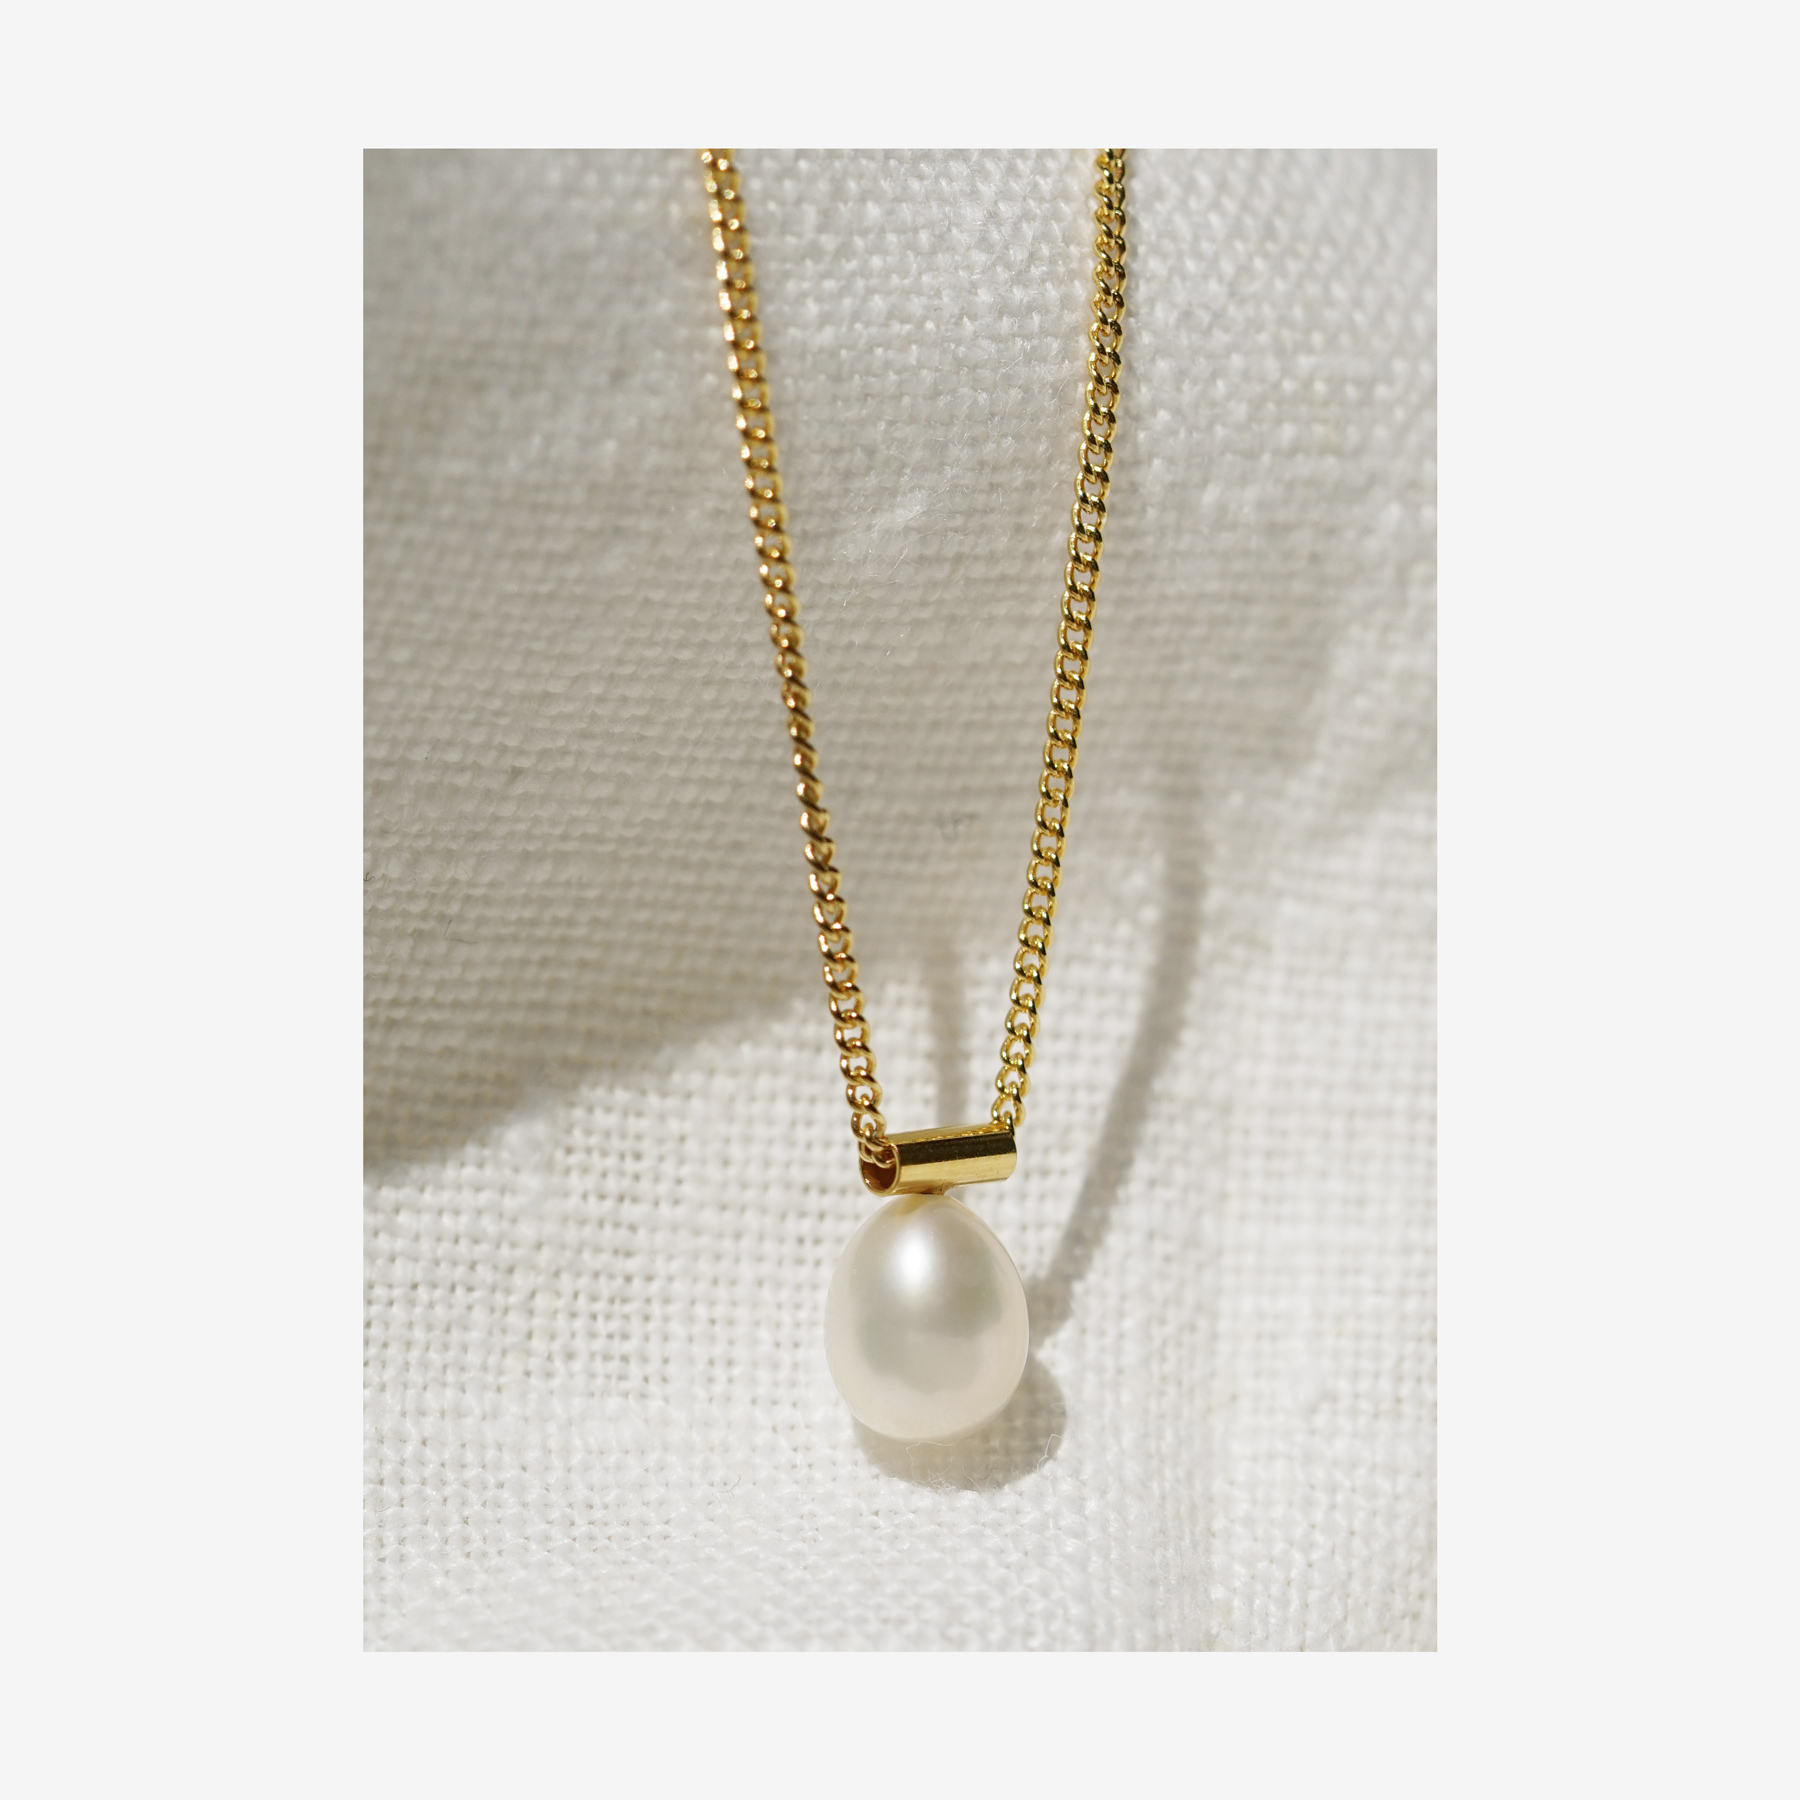 Pearl 02 gold plated necklace - NURA.design